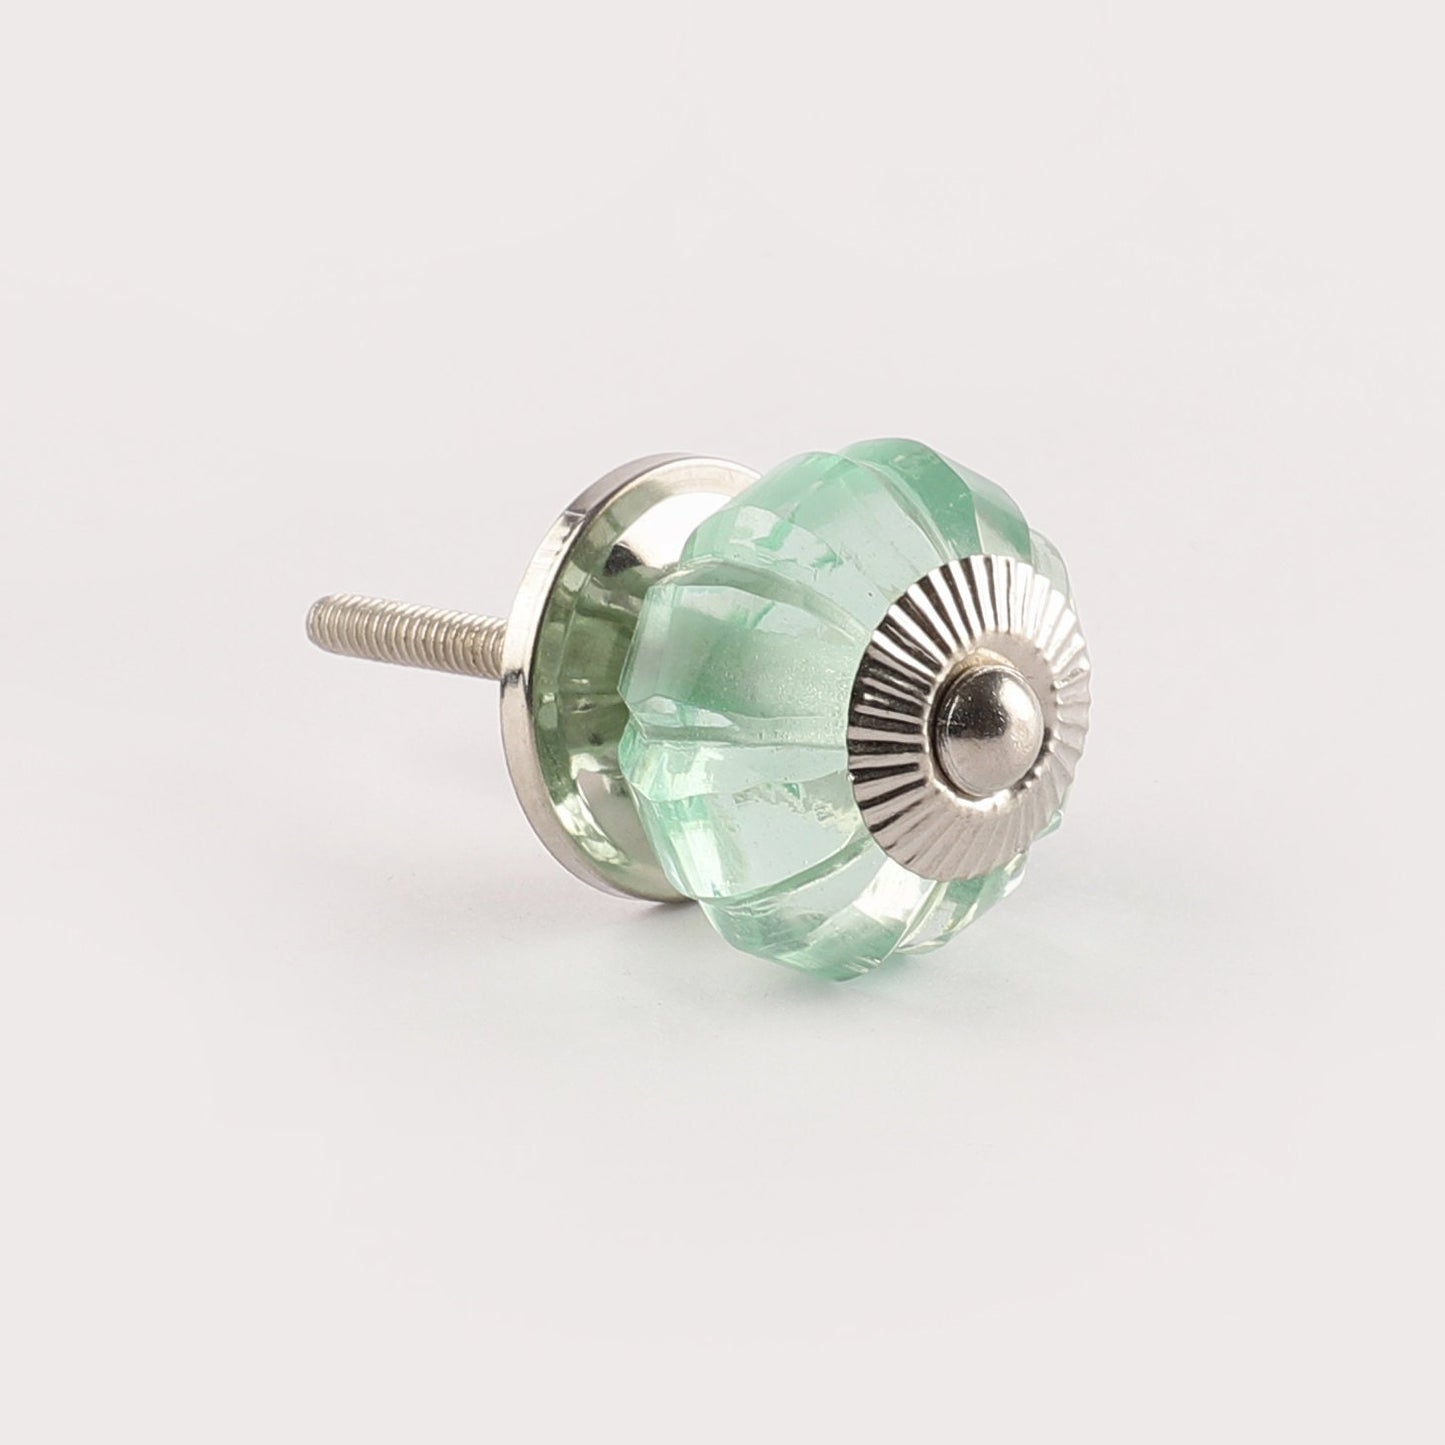 Classic Teal Glass Pull Knobs (G20)